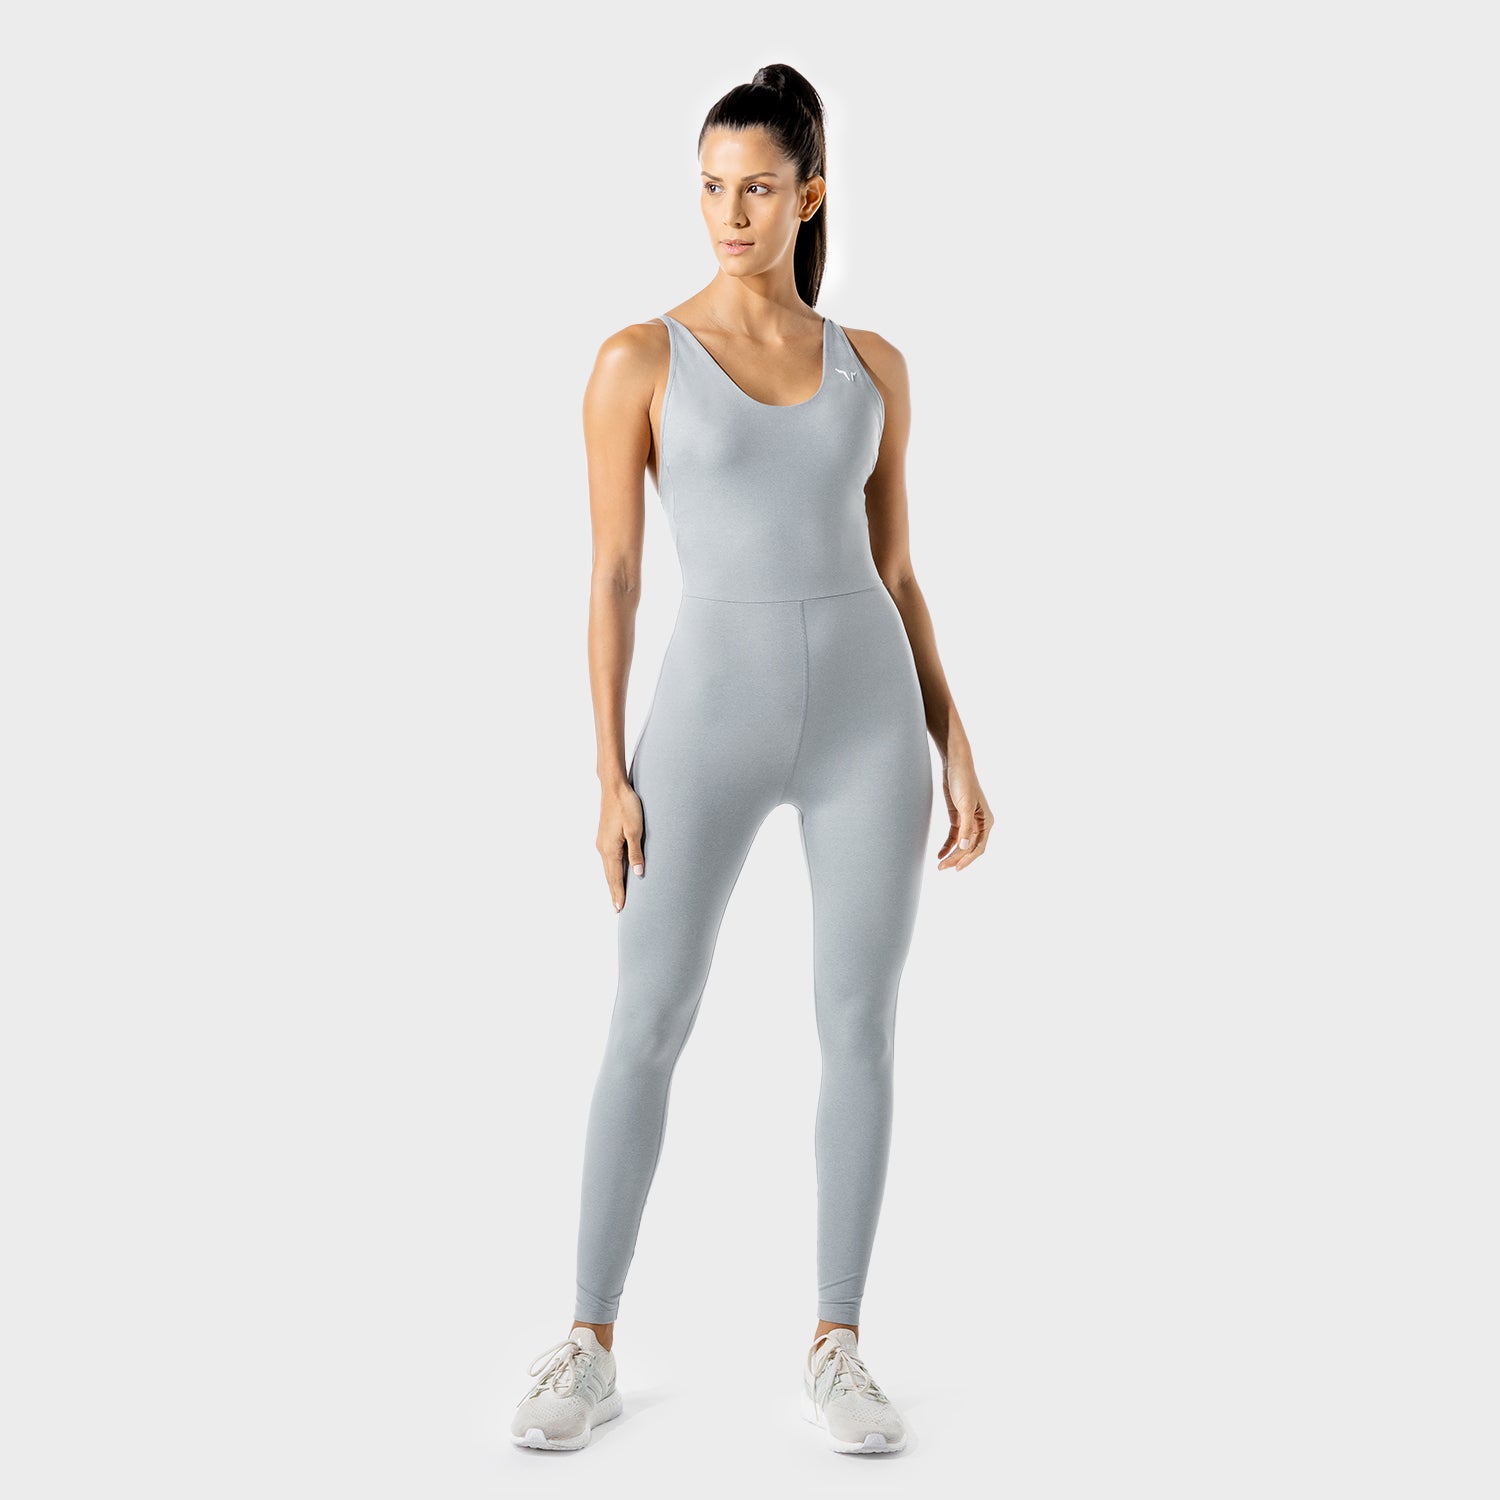 squatwolf-gym-wear-womens-fitness-performance-catsuit-grey-workout-tops